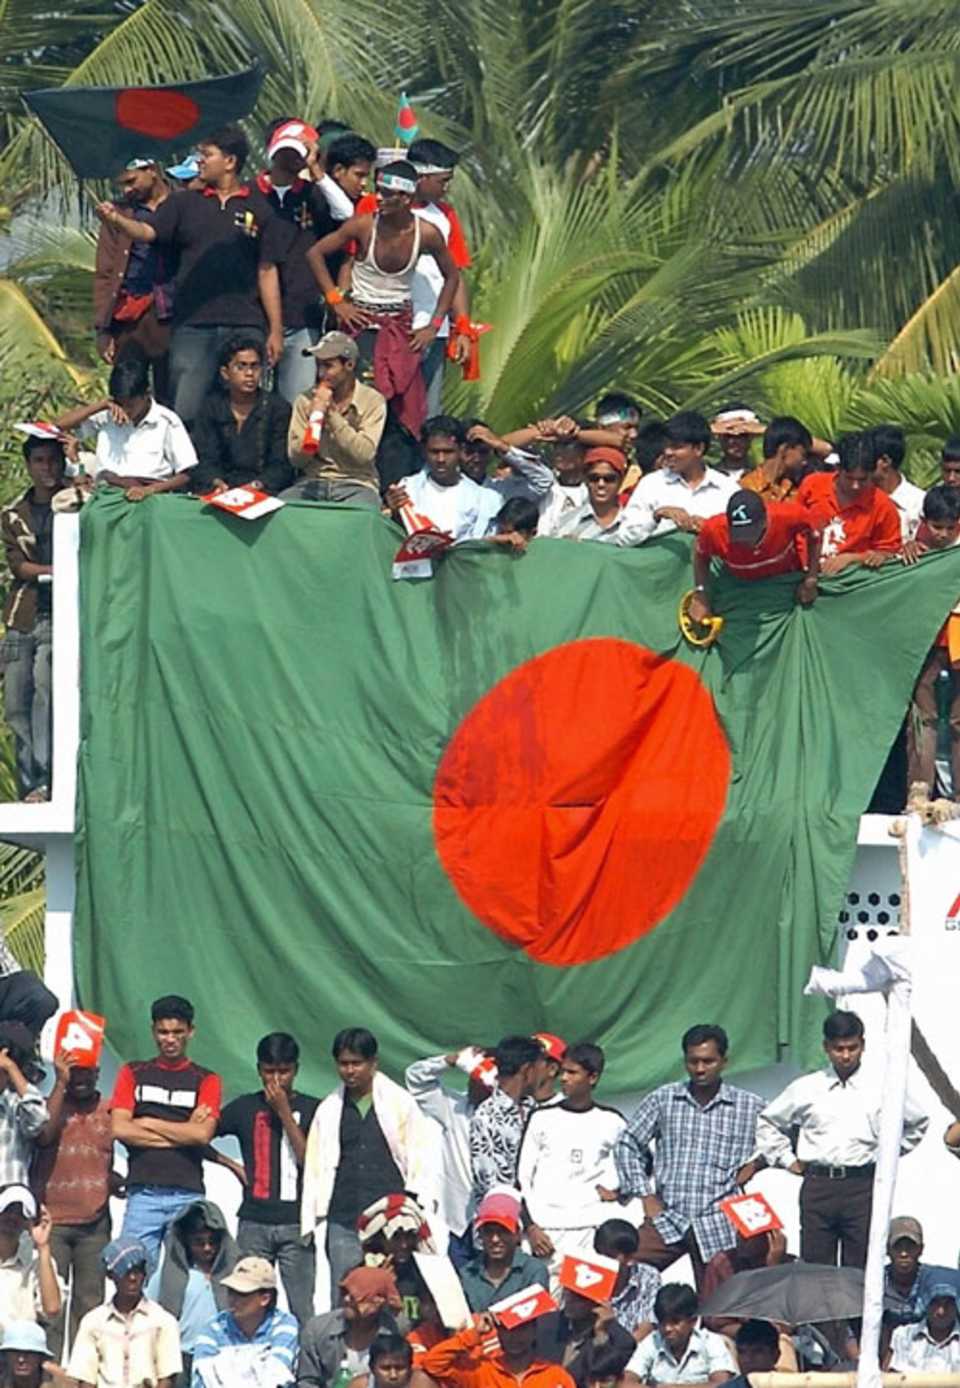 Bangladesh supporters revel in victory